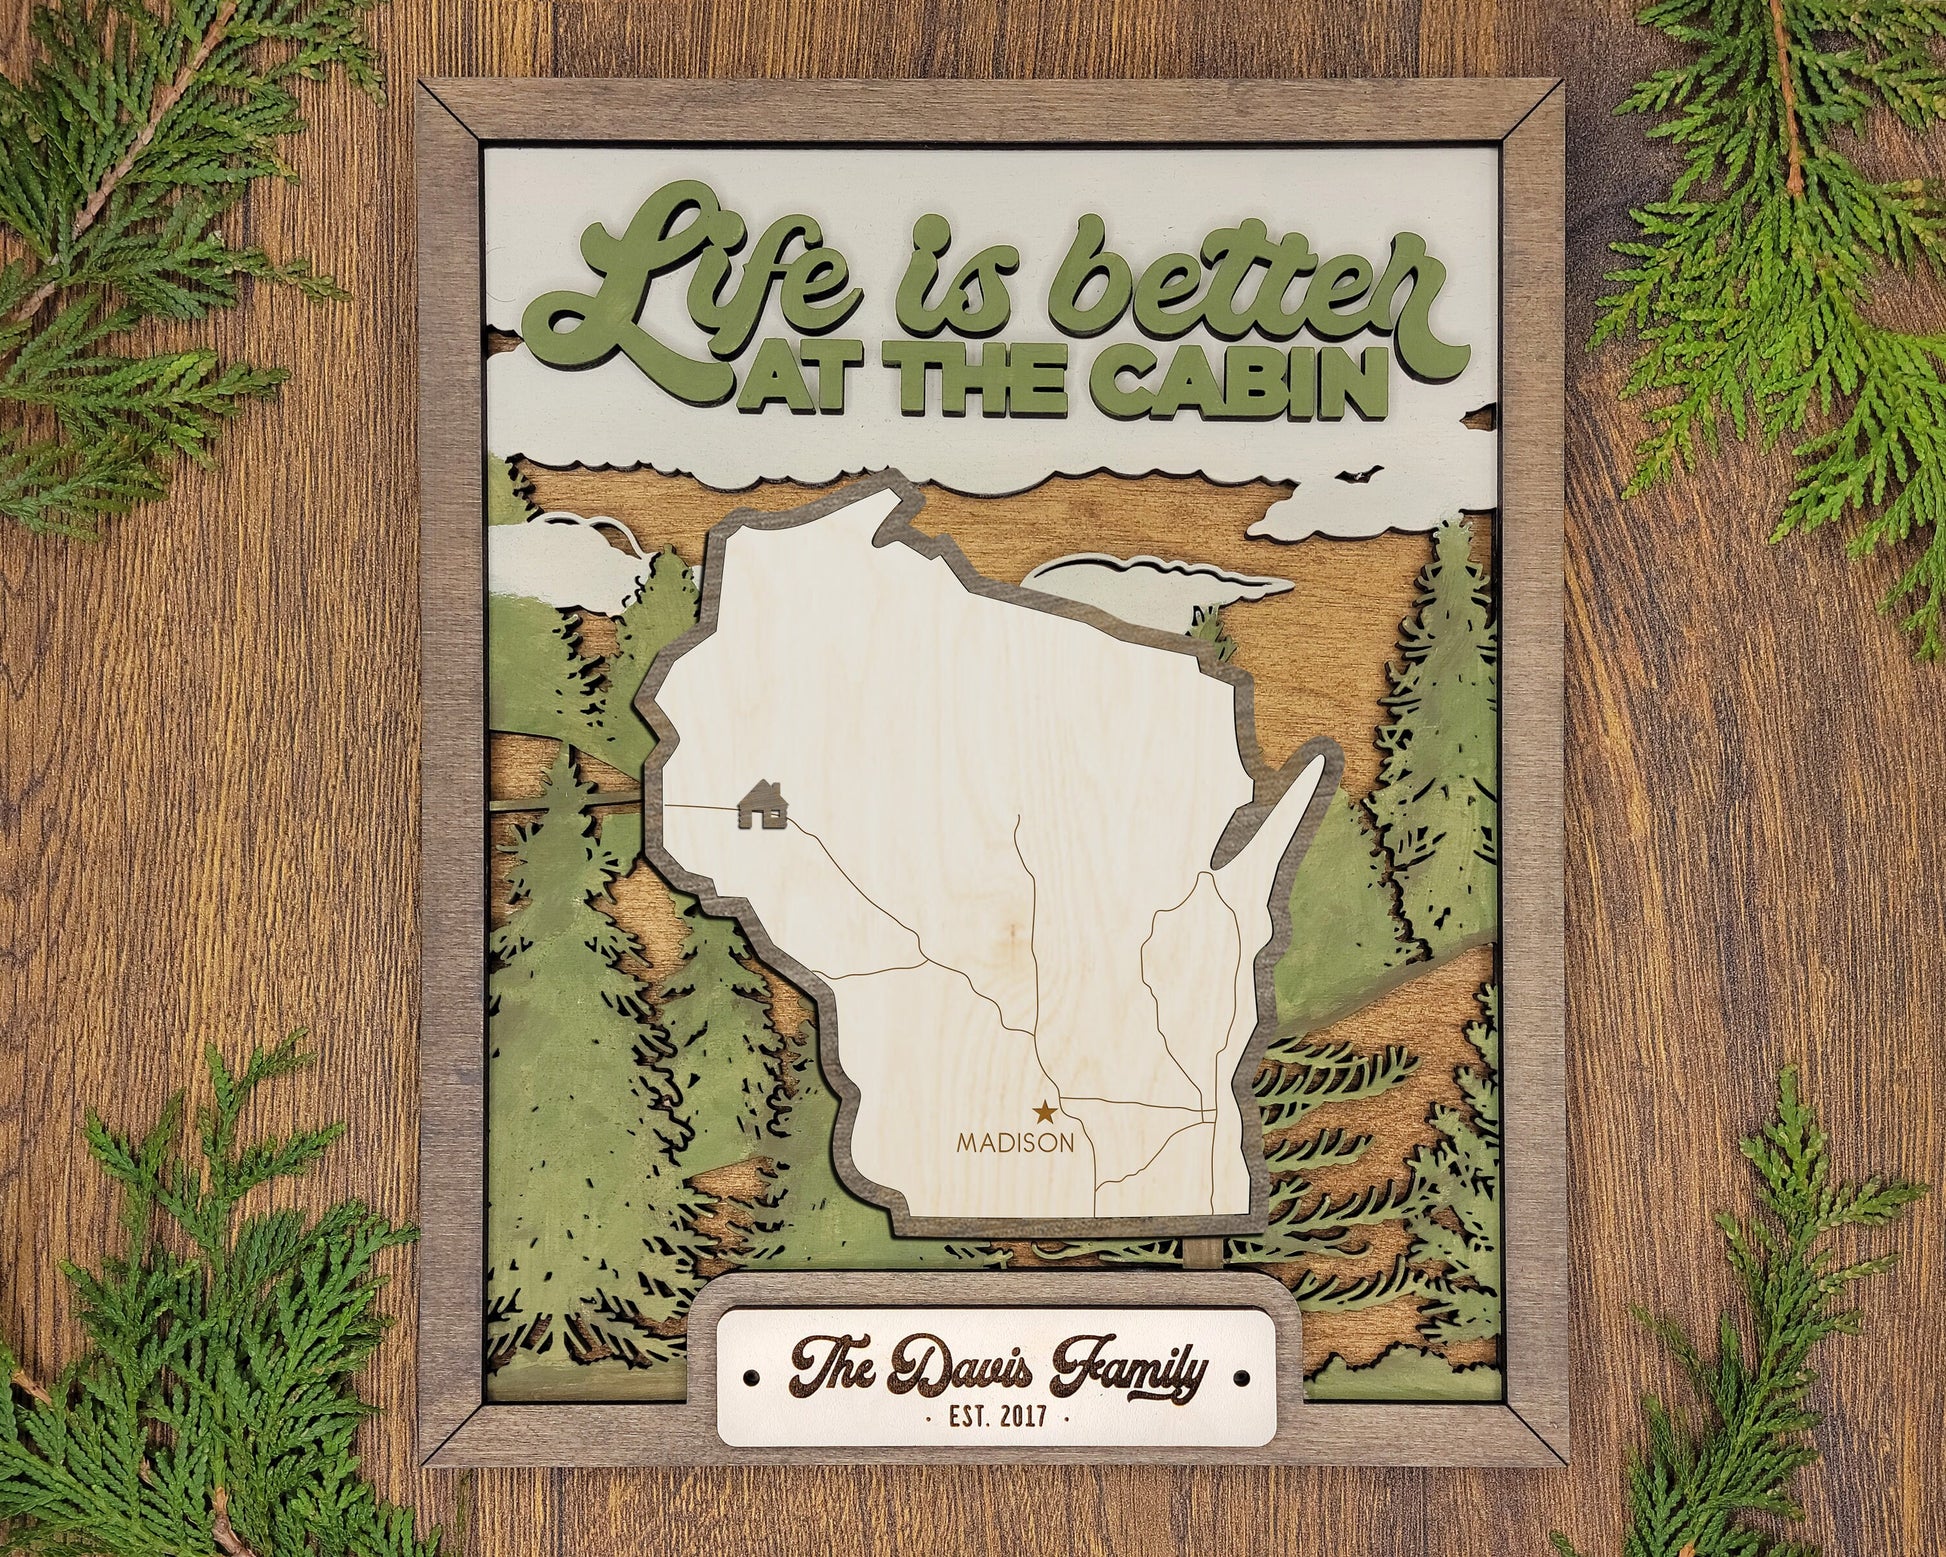 The Wisconsin Frame - 13 text options, 12 backgrounds, 25 icons Included - Make over 7,500 designs - Glowforge & Lightburn Tested